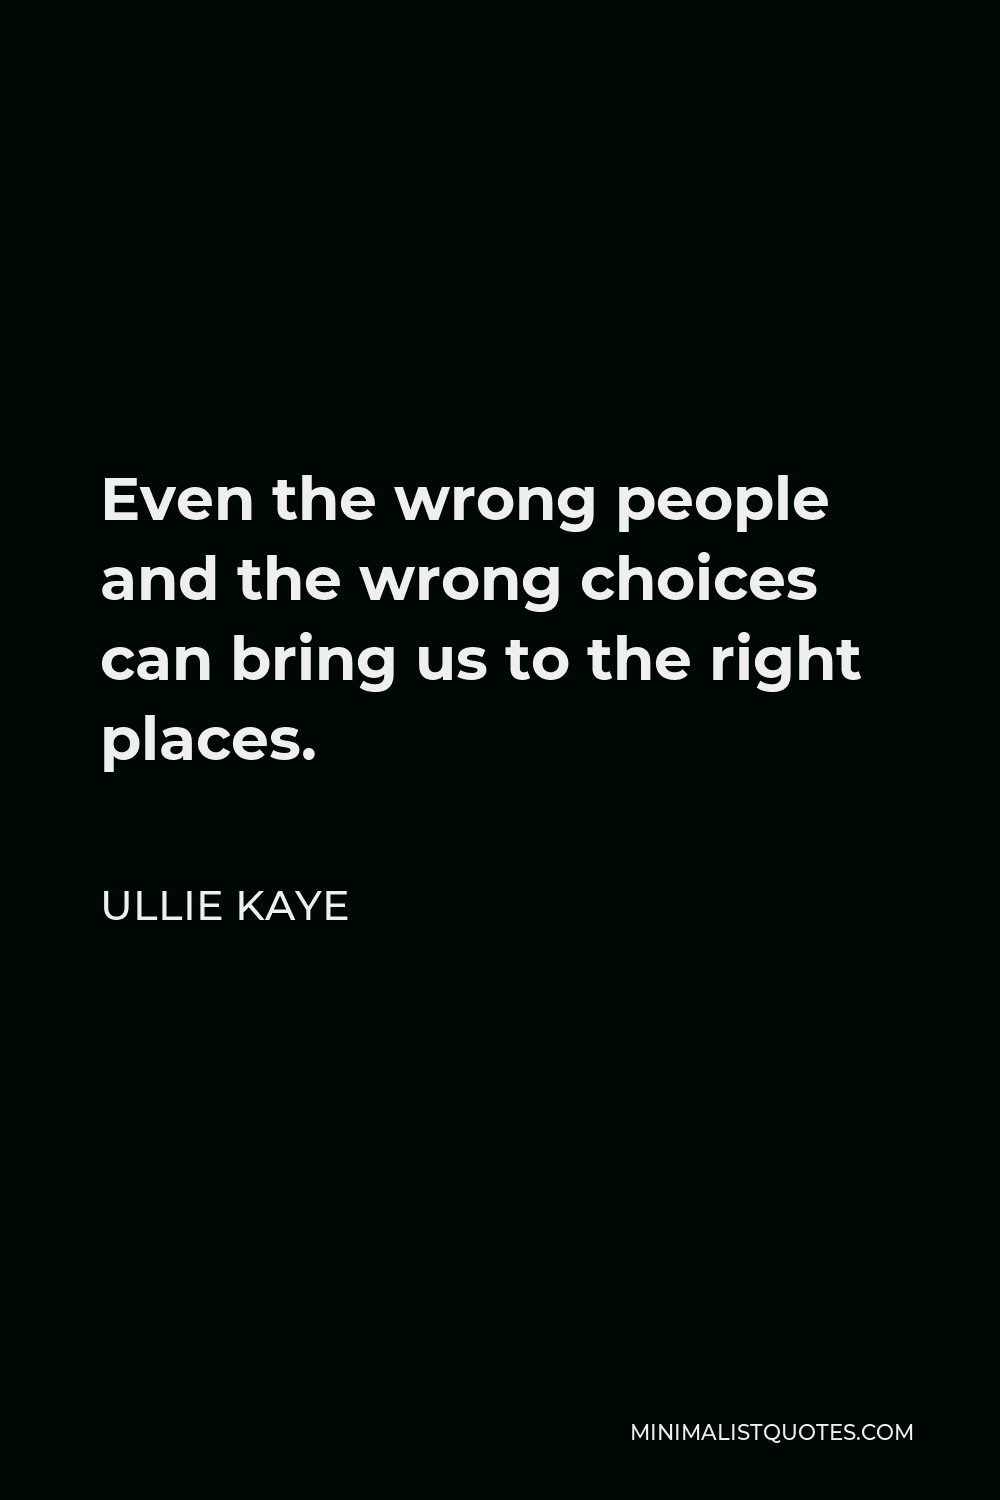 Ullie Kaye Quote - Even the wrong people and the wrong choices can bring us to the right places.